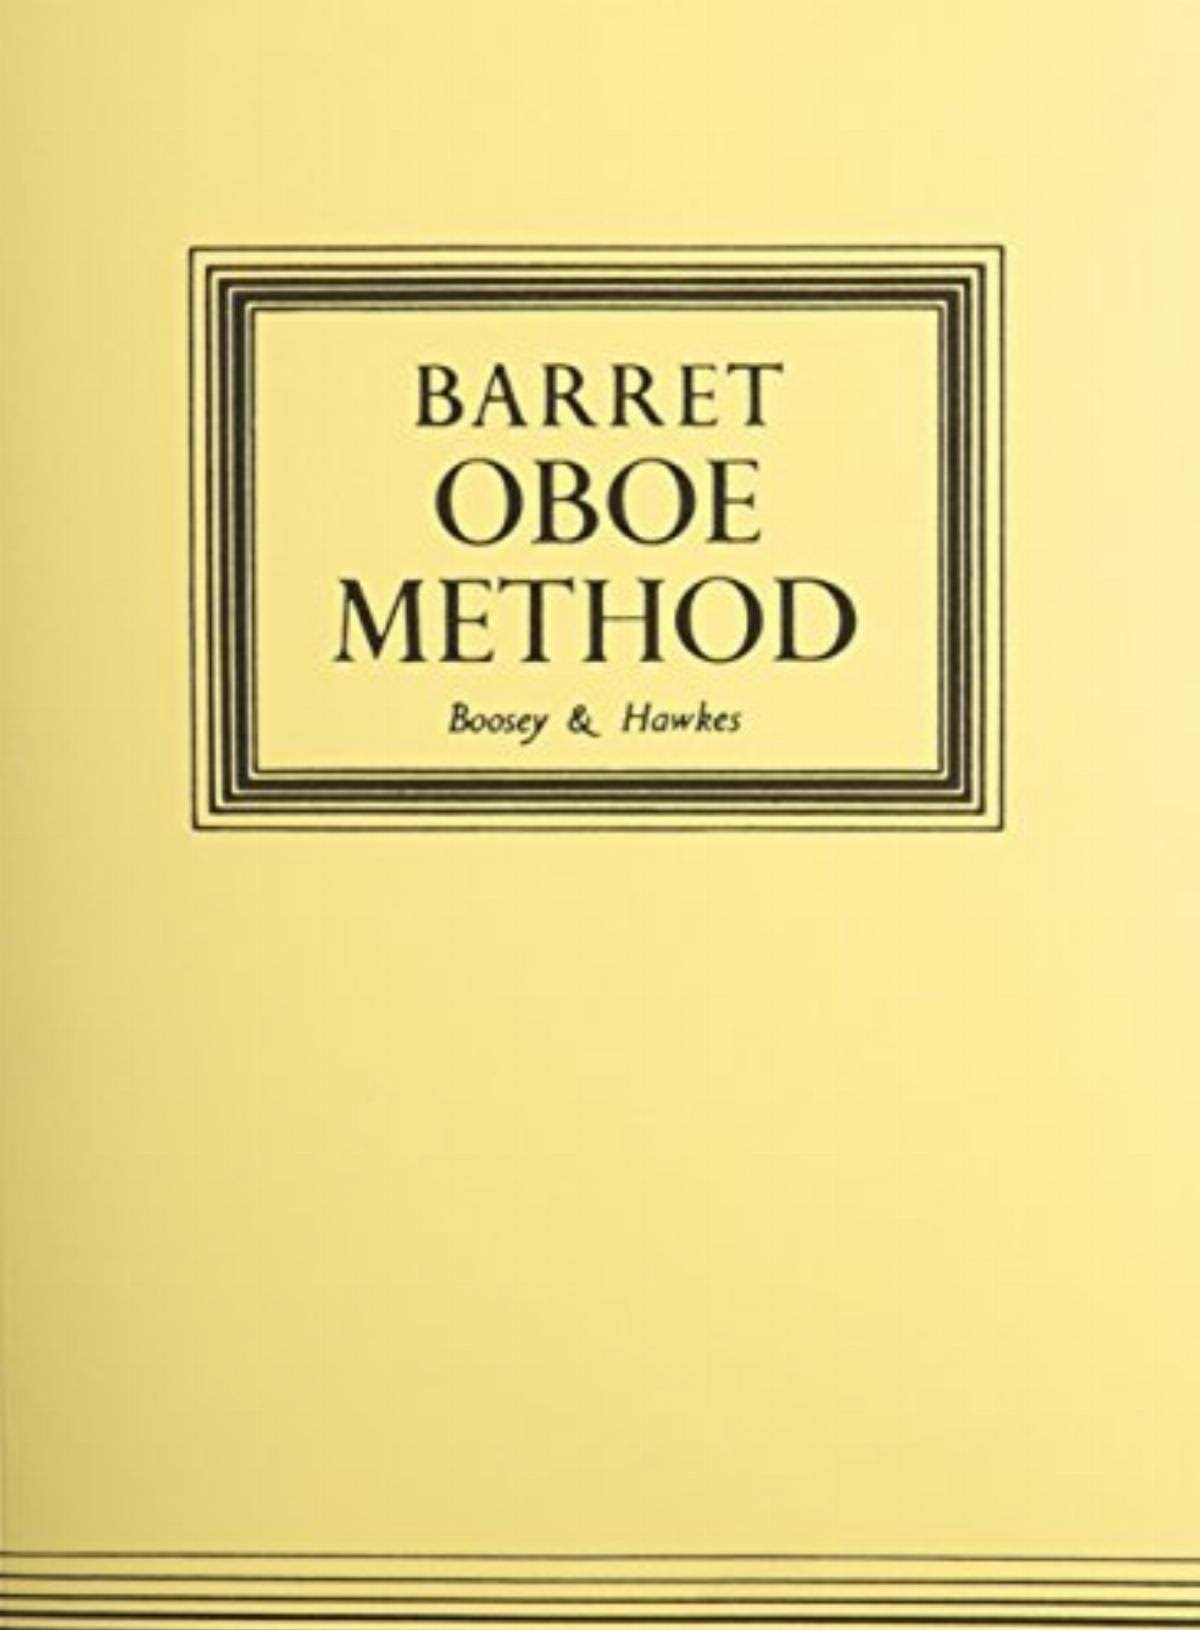 Boosey & Hawkes: A Complete Method for the Oboe - A. M. R. Barret